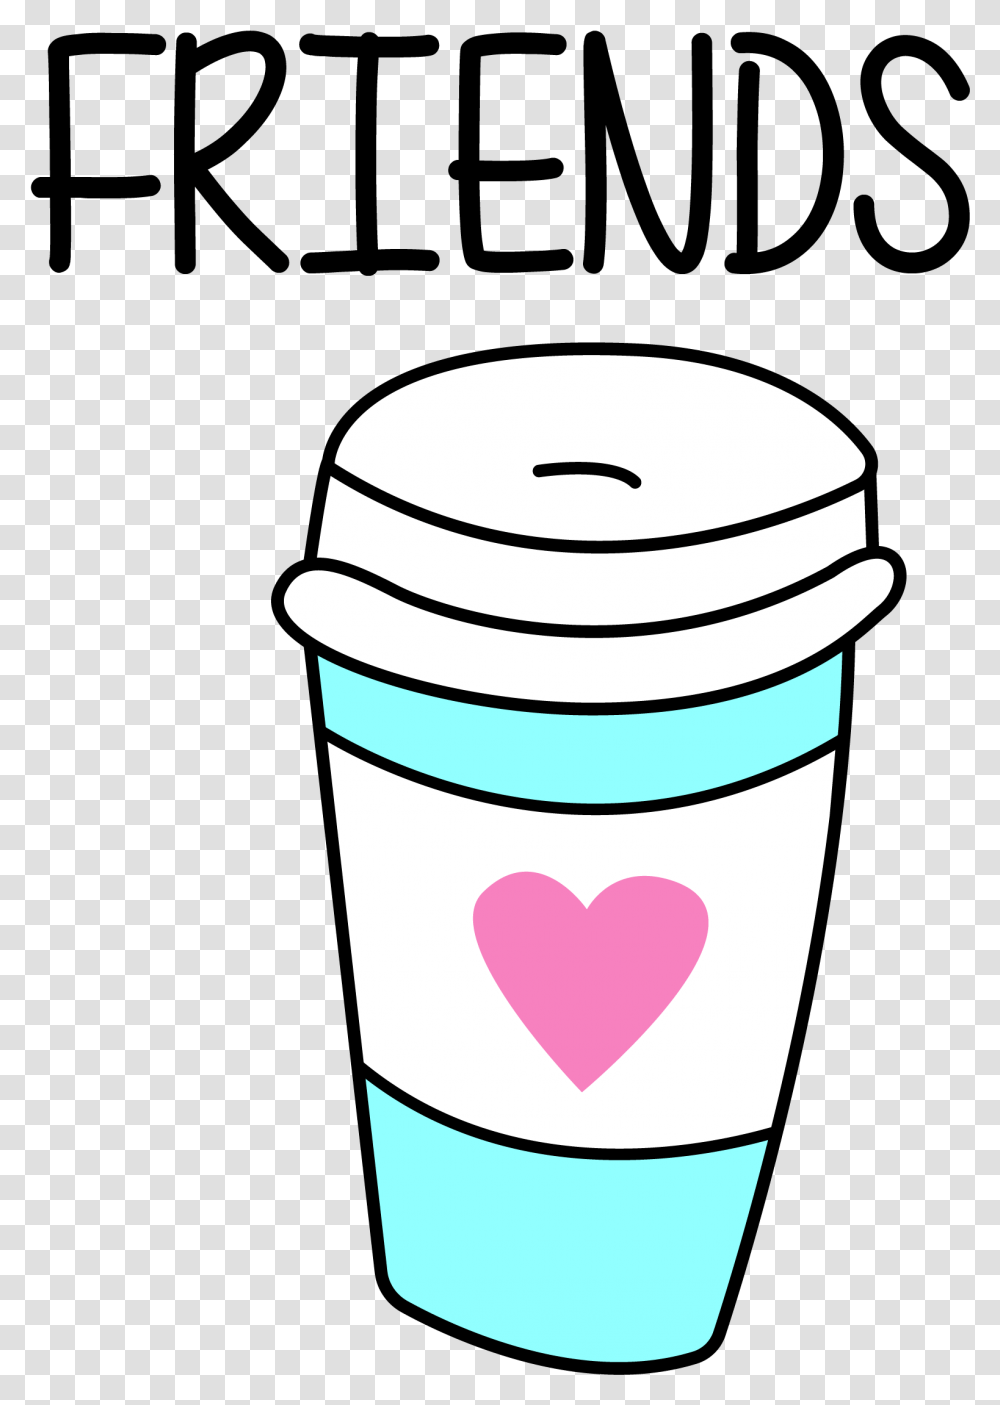 Best Friends, Cup, Bucket, Coffee Cup, Bottle Transparent Png